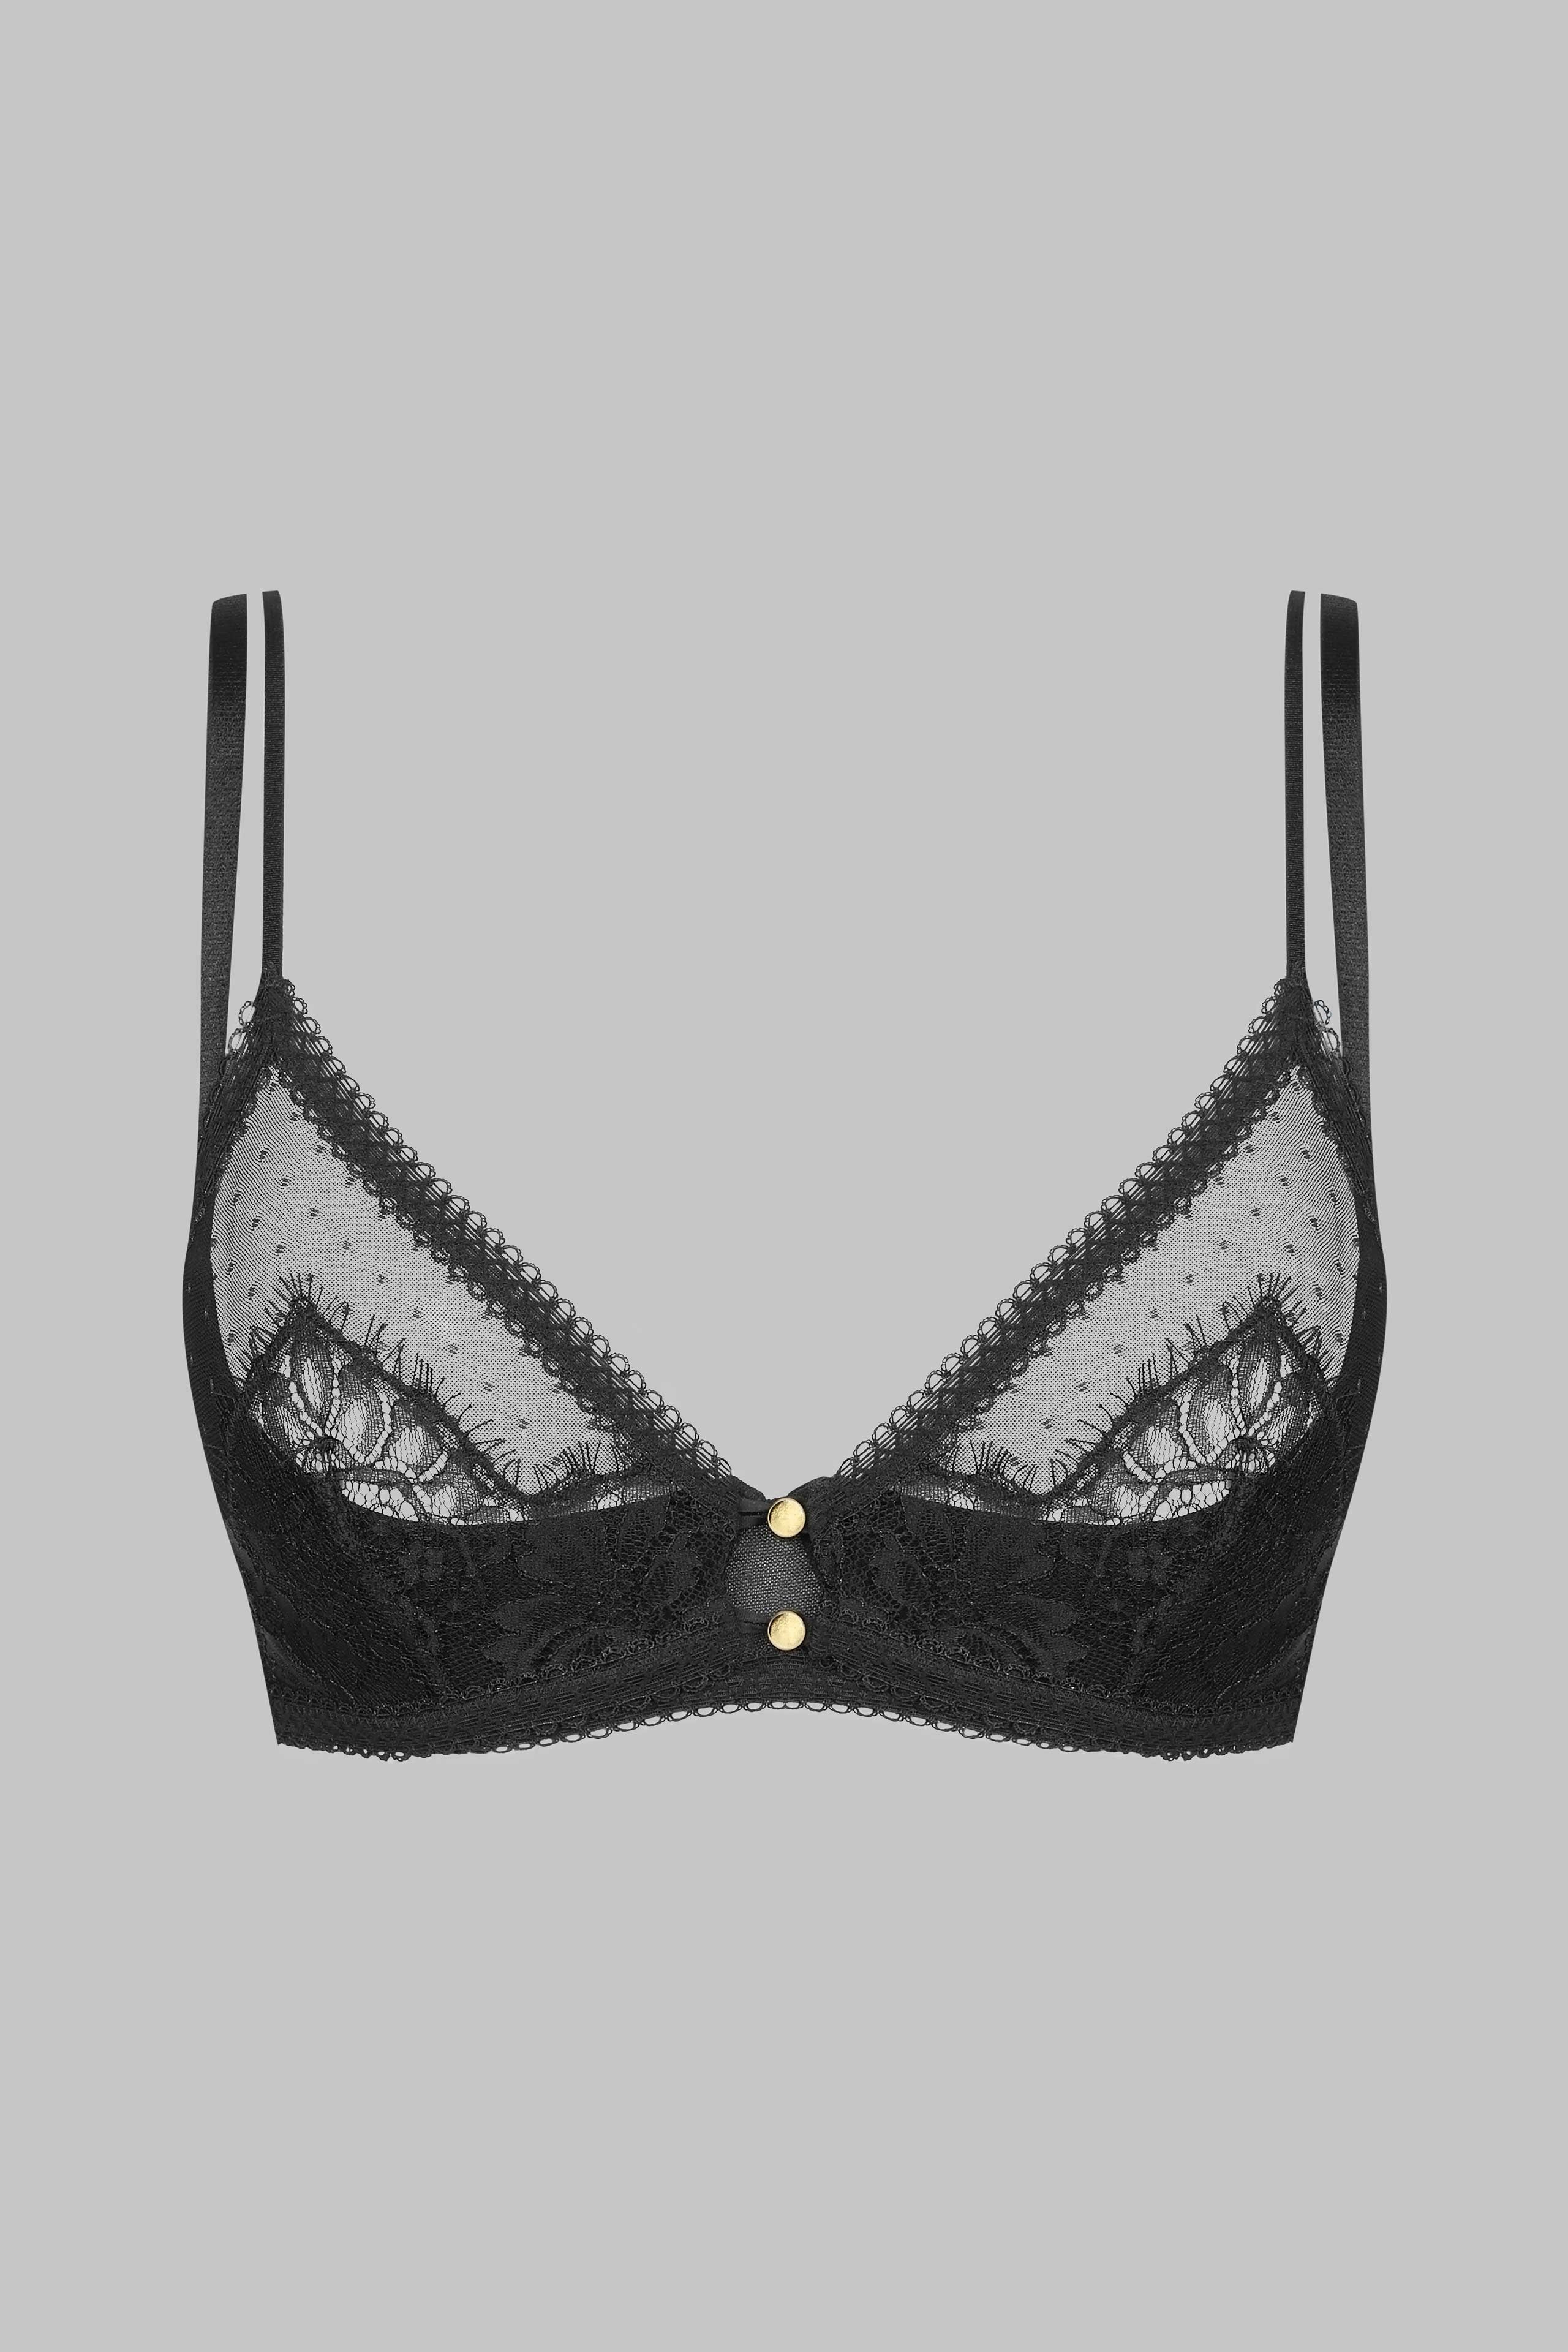 amanda mears recommends 1/4 Cup Bra Lingerie